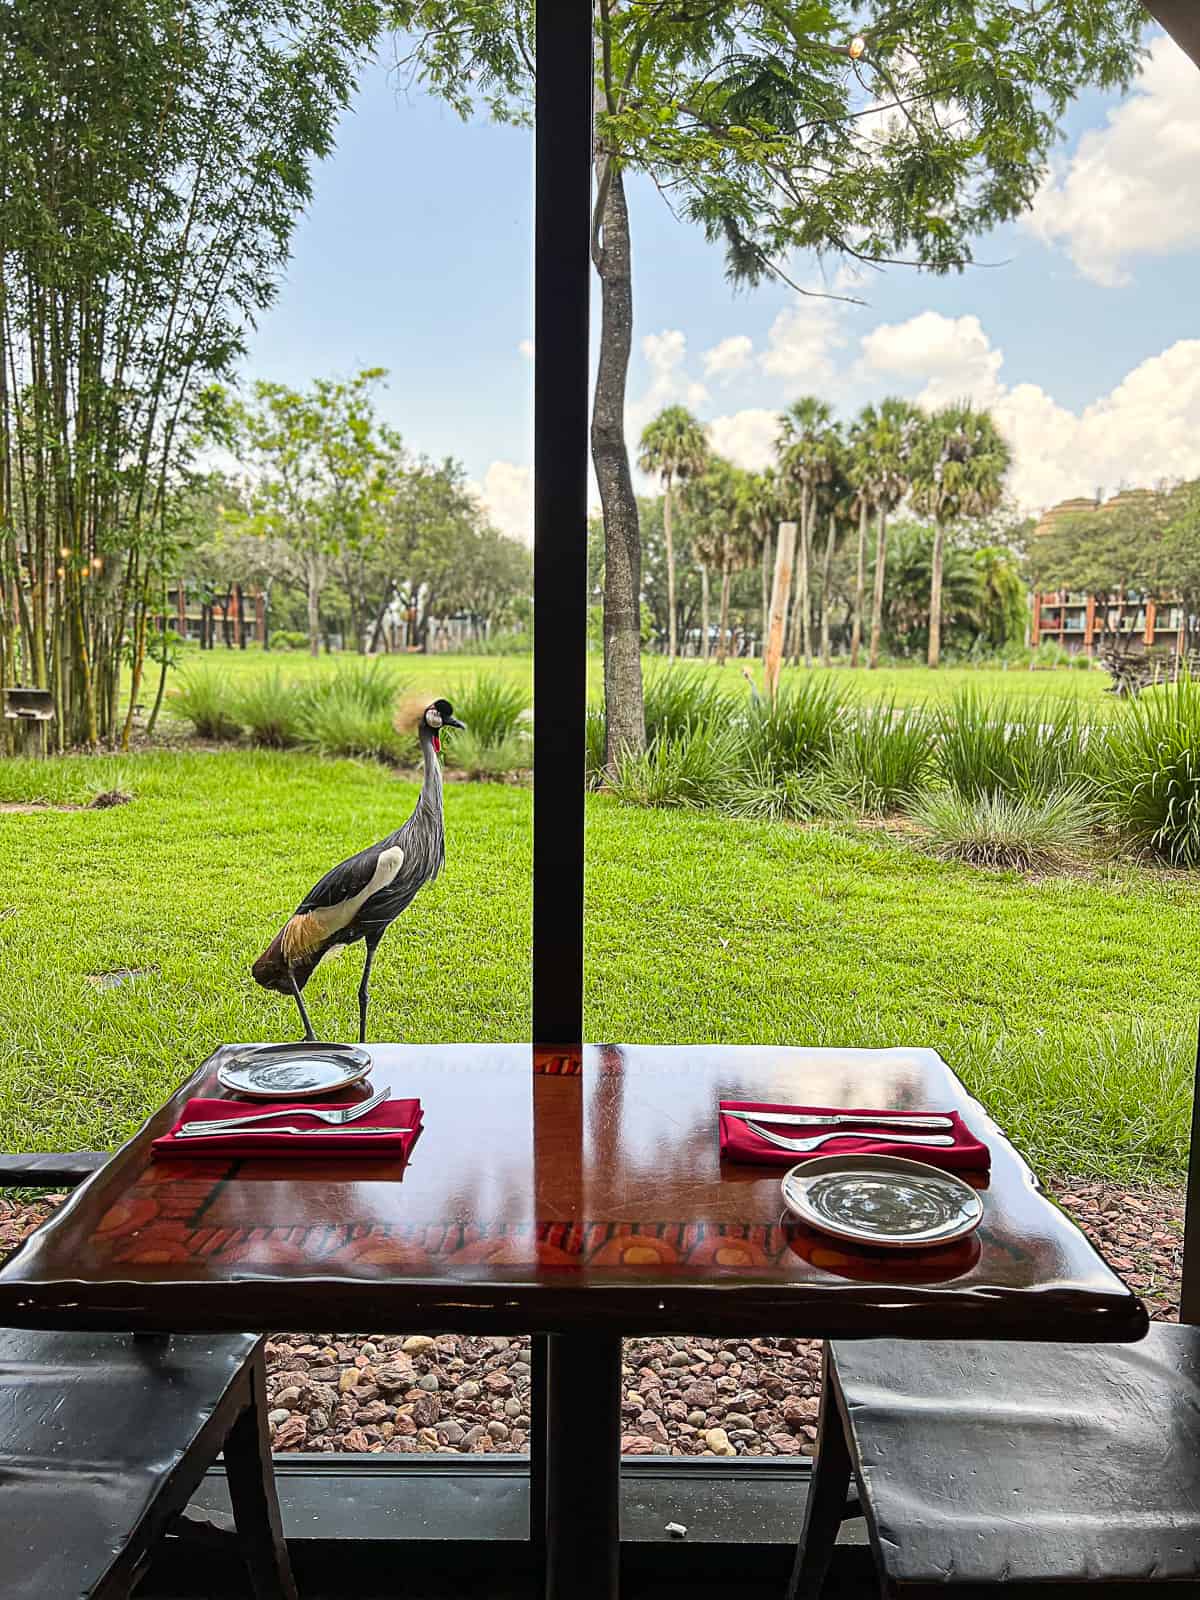 Dining with view of animals during lunch at Sanaa Restaurant in Animal Kingdom Lodge Resort at Walt Disney World